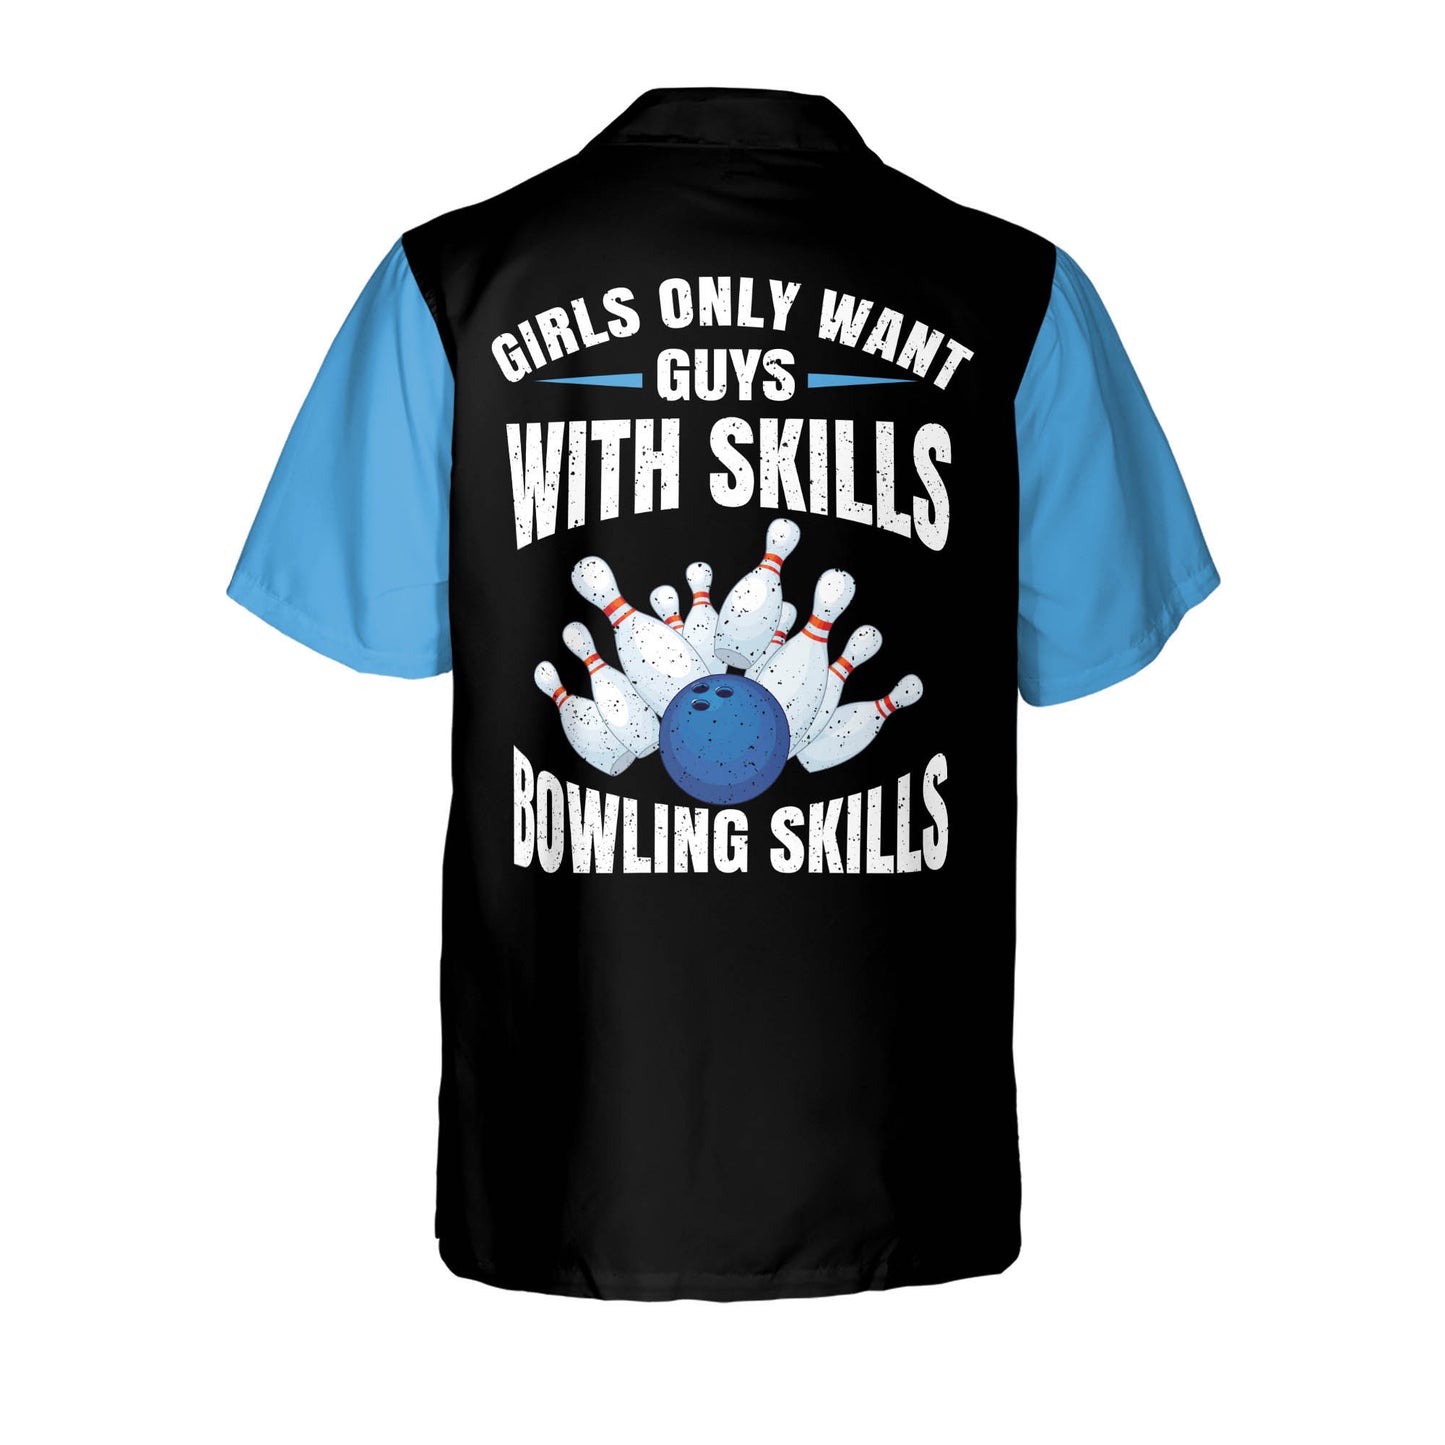 Girls Only Want Guys with Bowling Skills Hawaiian Shirt HB0058